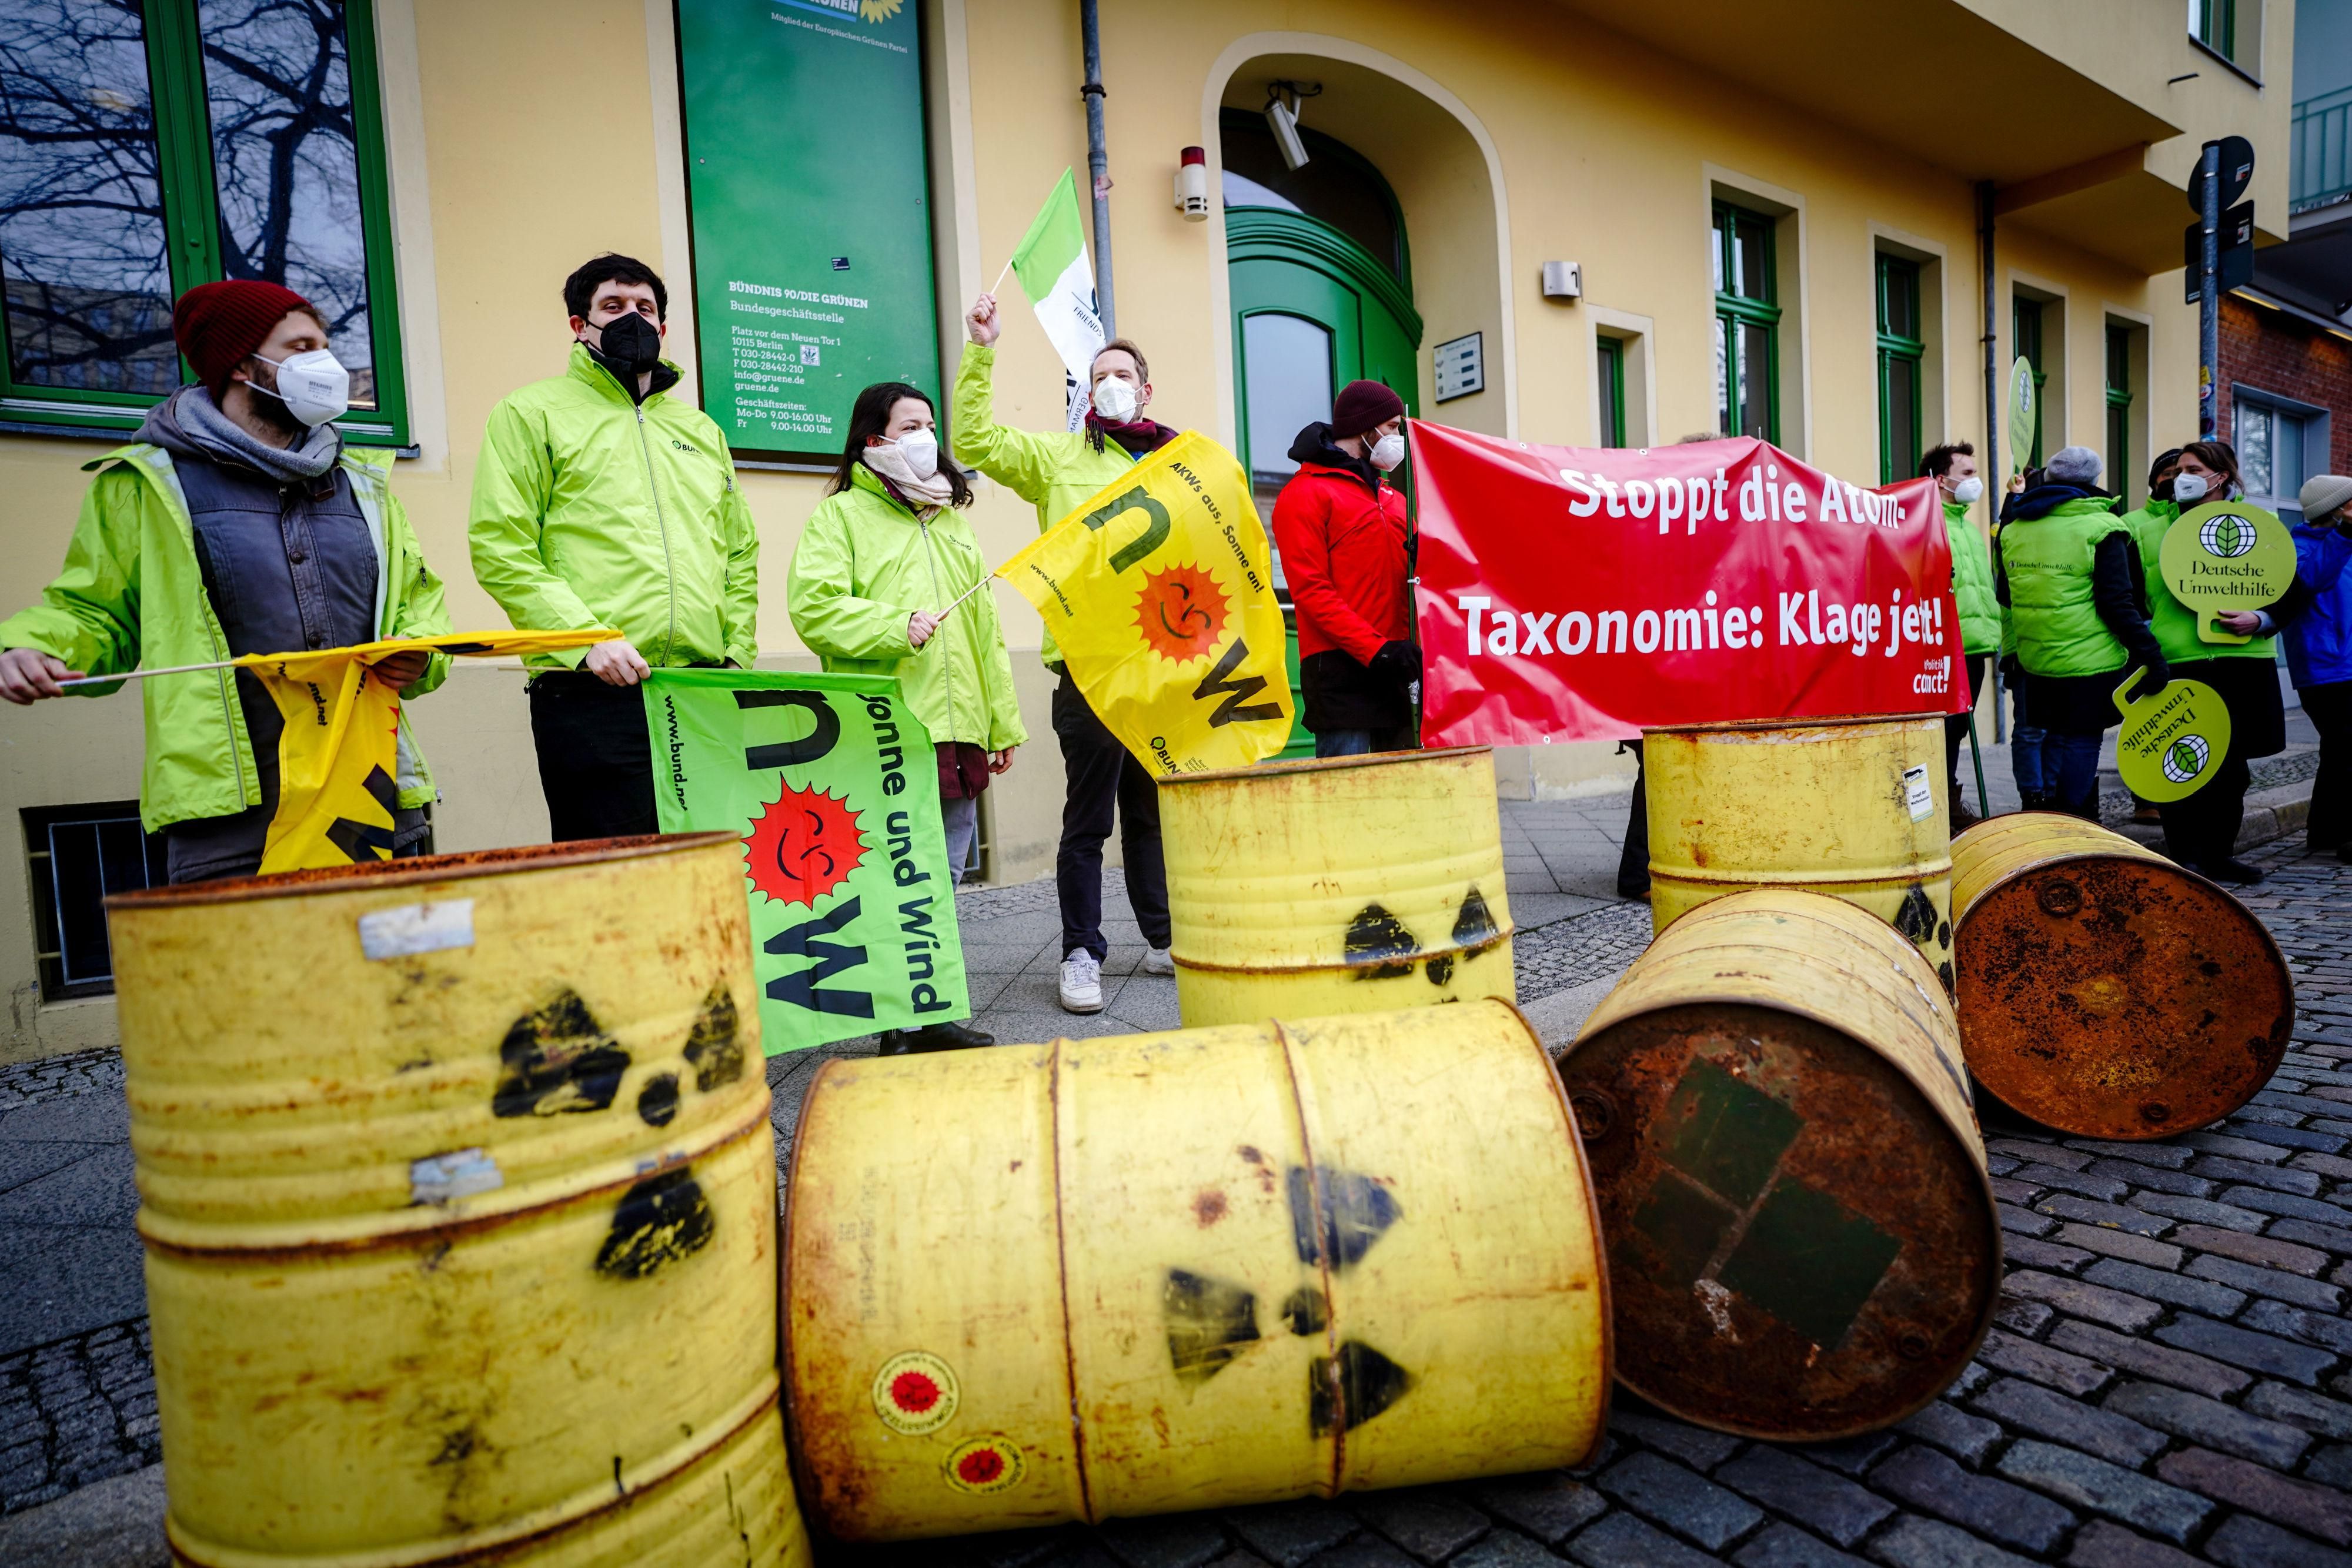 Green campaigners in Germany oppose labeling gas and nuclear power as green energy